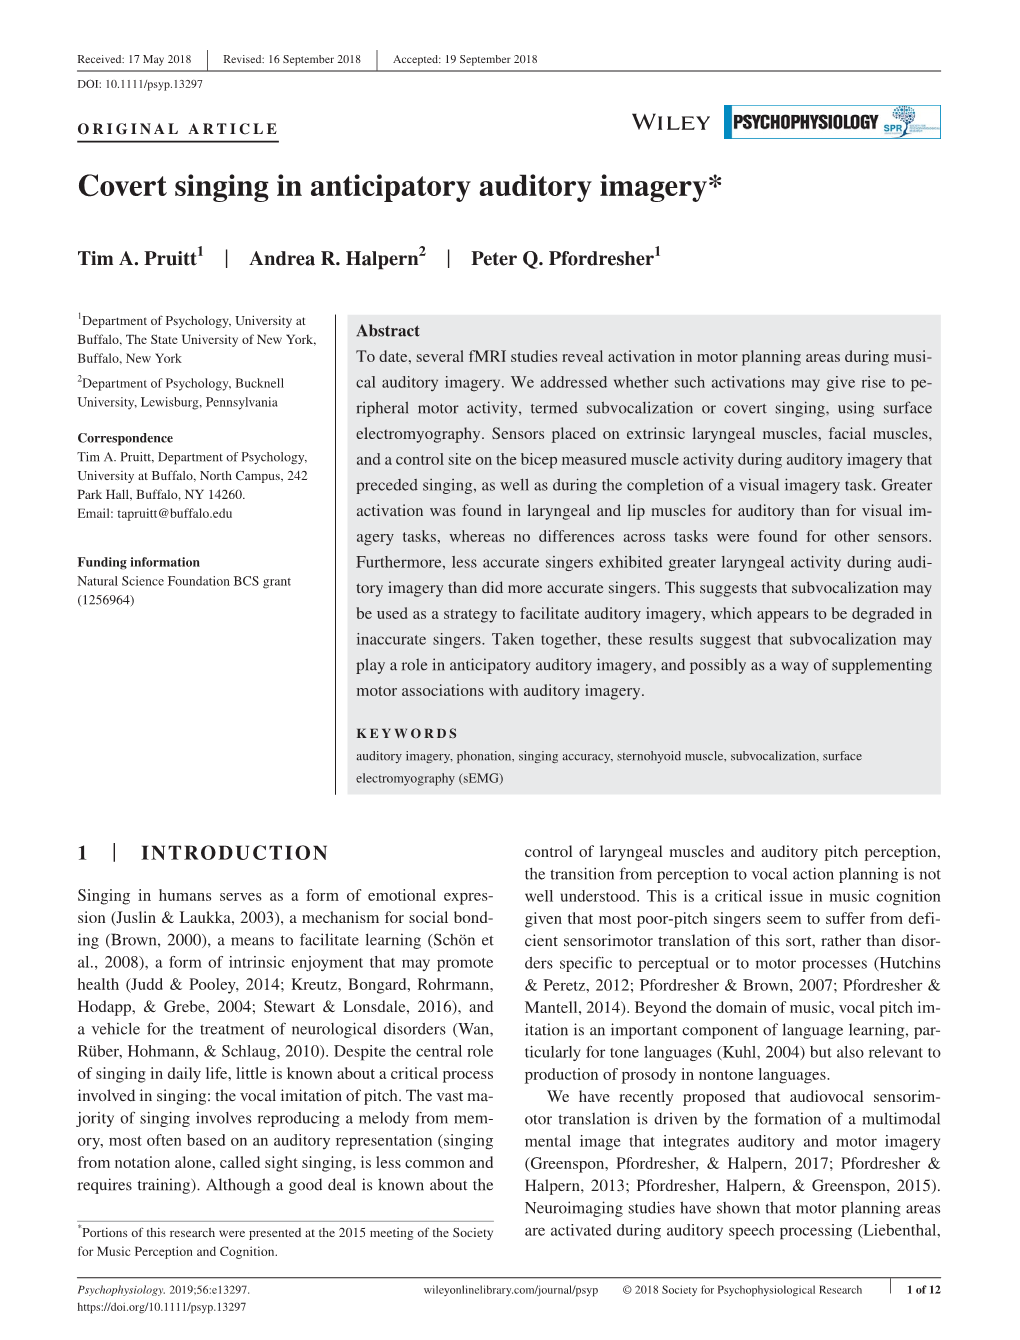 Covert Singing in Anticipatory Auditory Imagery*